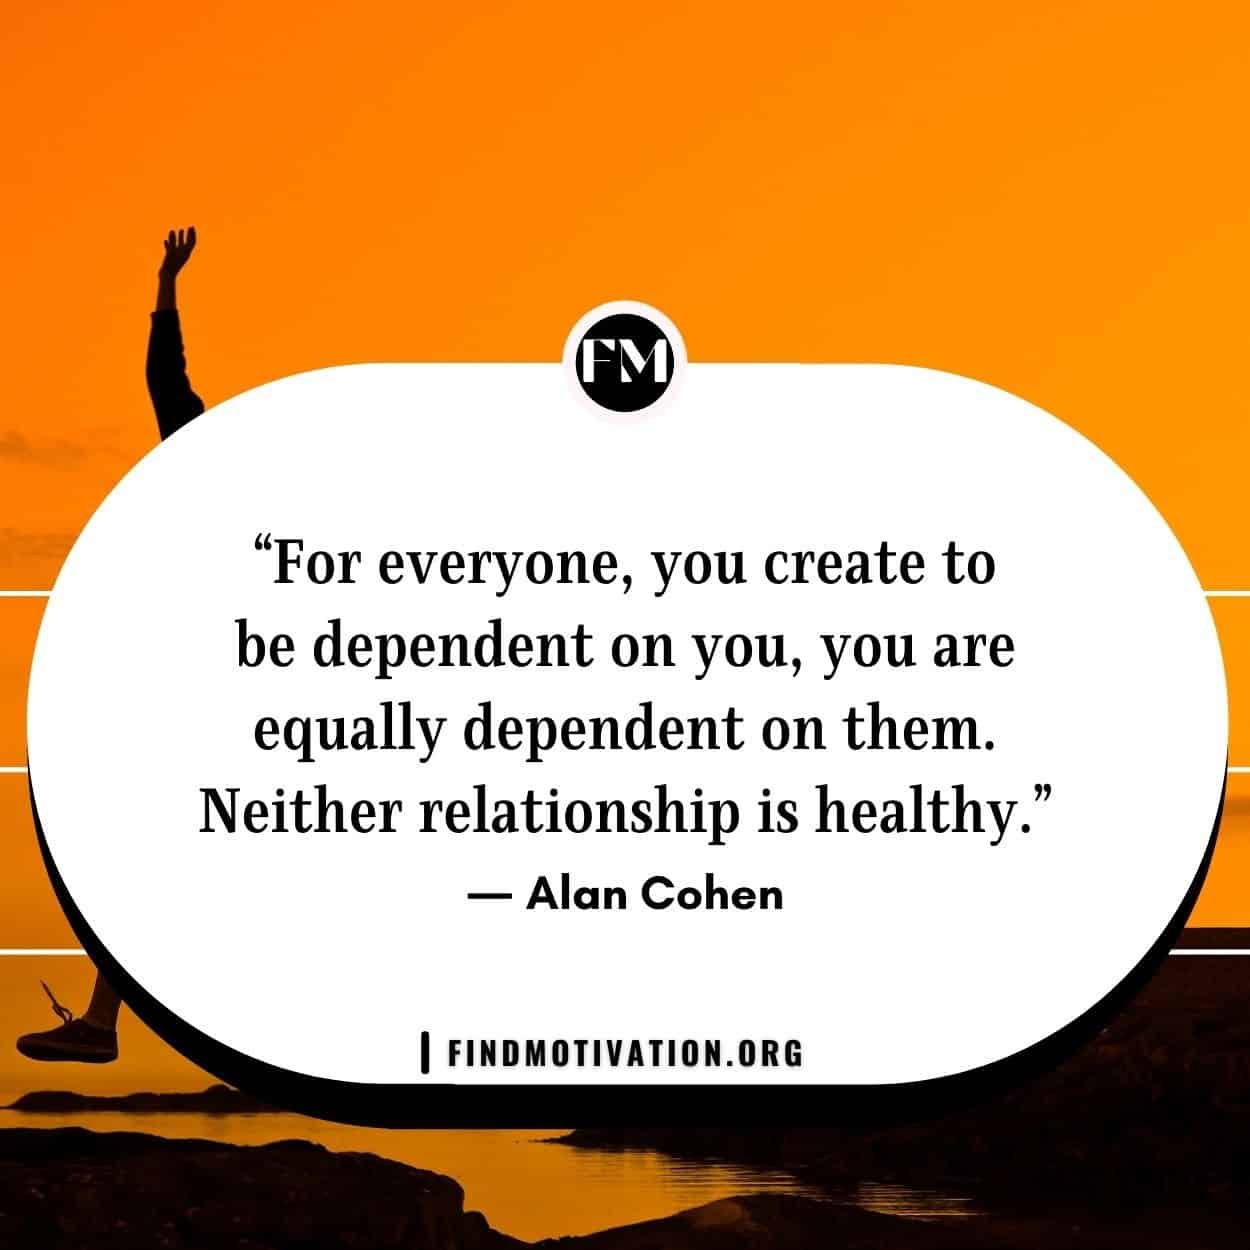 Motivational healthy living quotes to keep your mind and body healthy